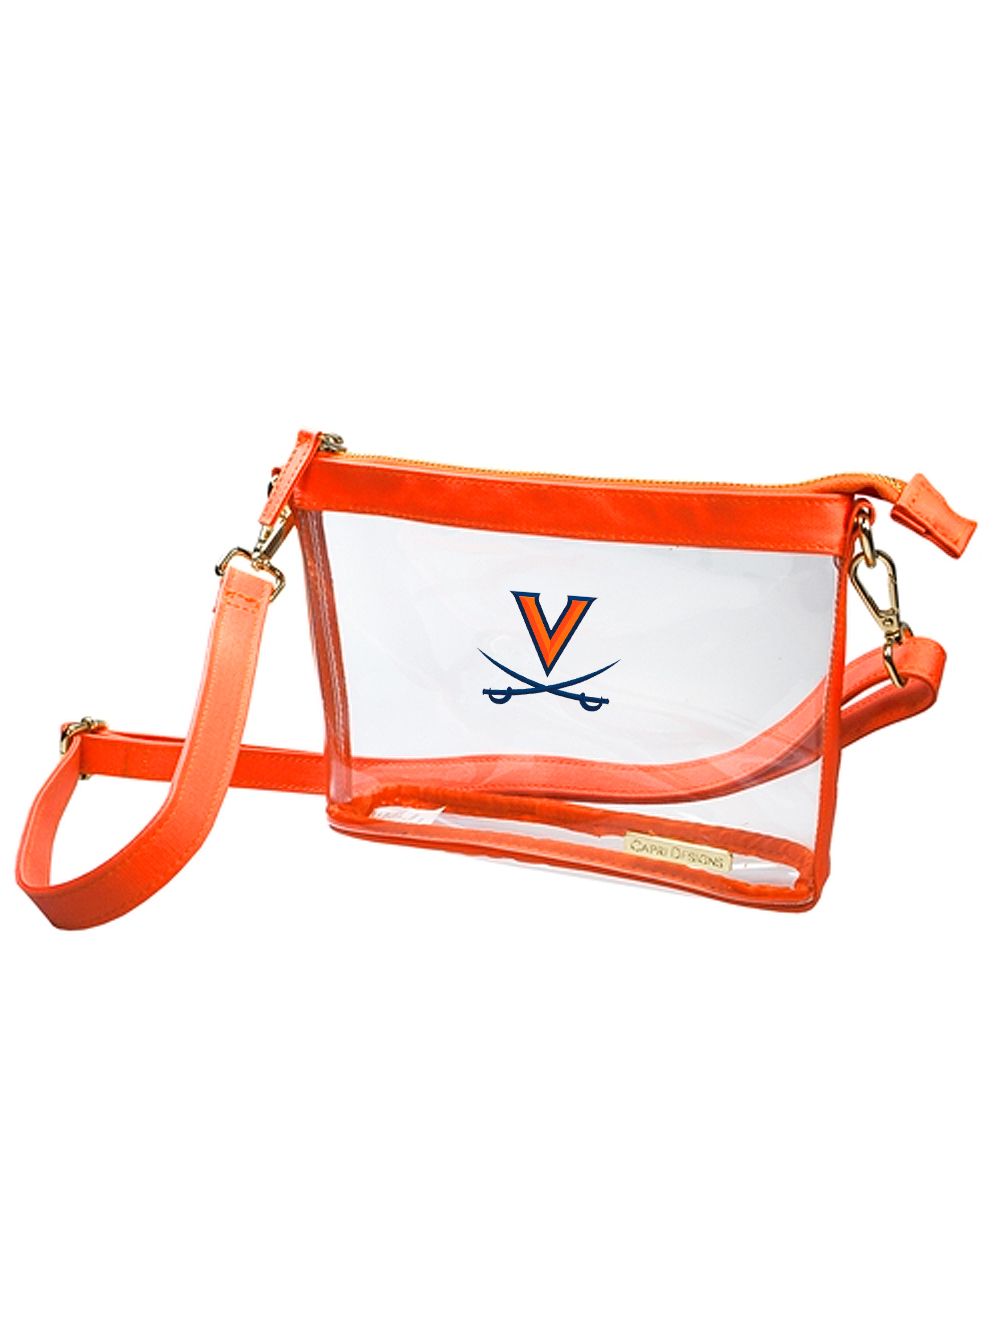 Clear Large Crossbody Bag - Mincer's of Charlottesville